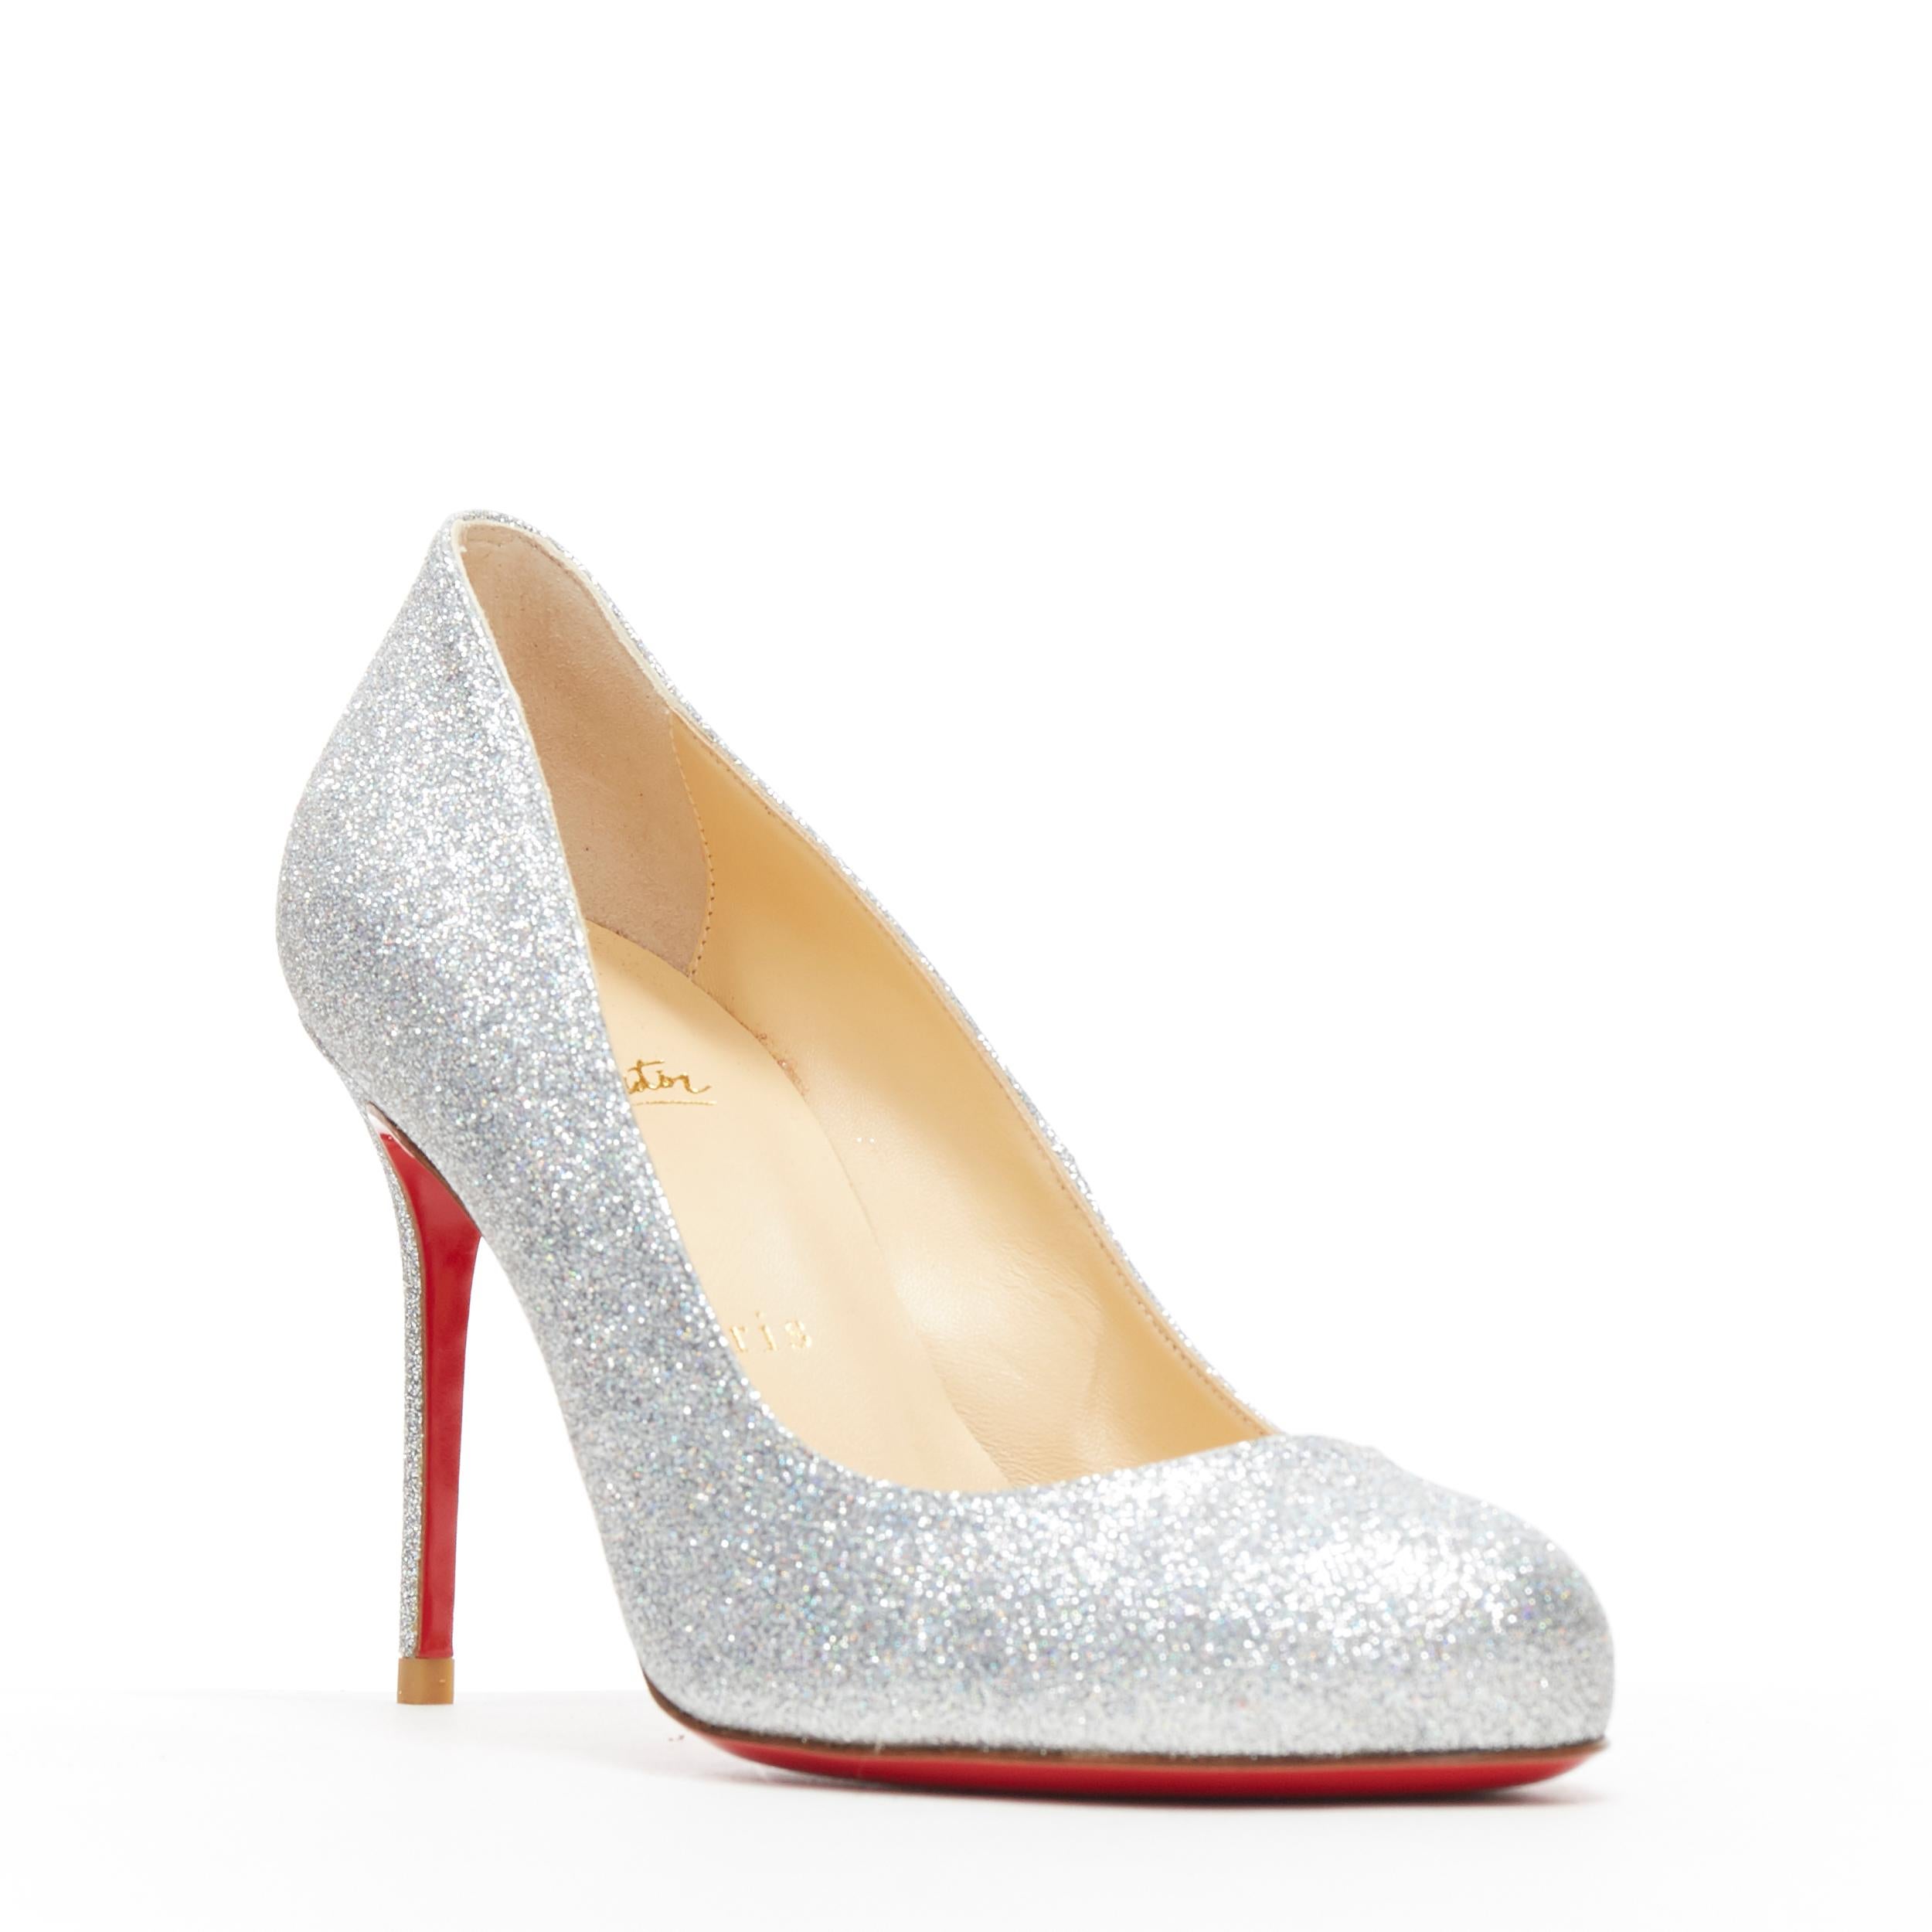 new CHRISTIAN LOUBOUTIN Fifi 85 silver glitter round toe slim heel pump EU37
Brand: Christian Louboutin
Designer: Christian Louboutin
Model Name / Style: Fifi 85
Material: Leather
Color: Silver
Pattern: Solid
Extra Detail: High (3-3.9 in) heel